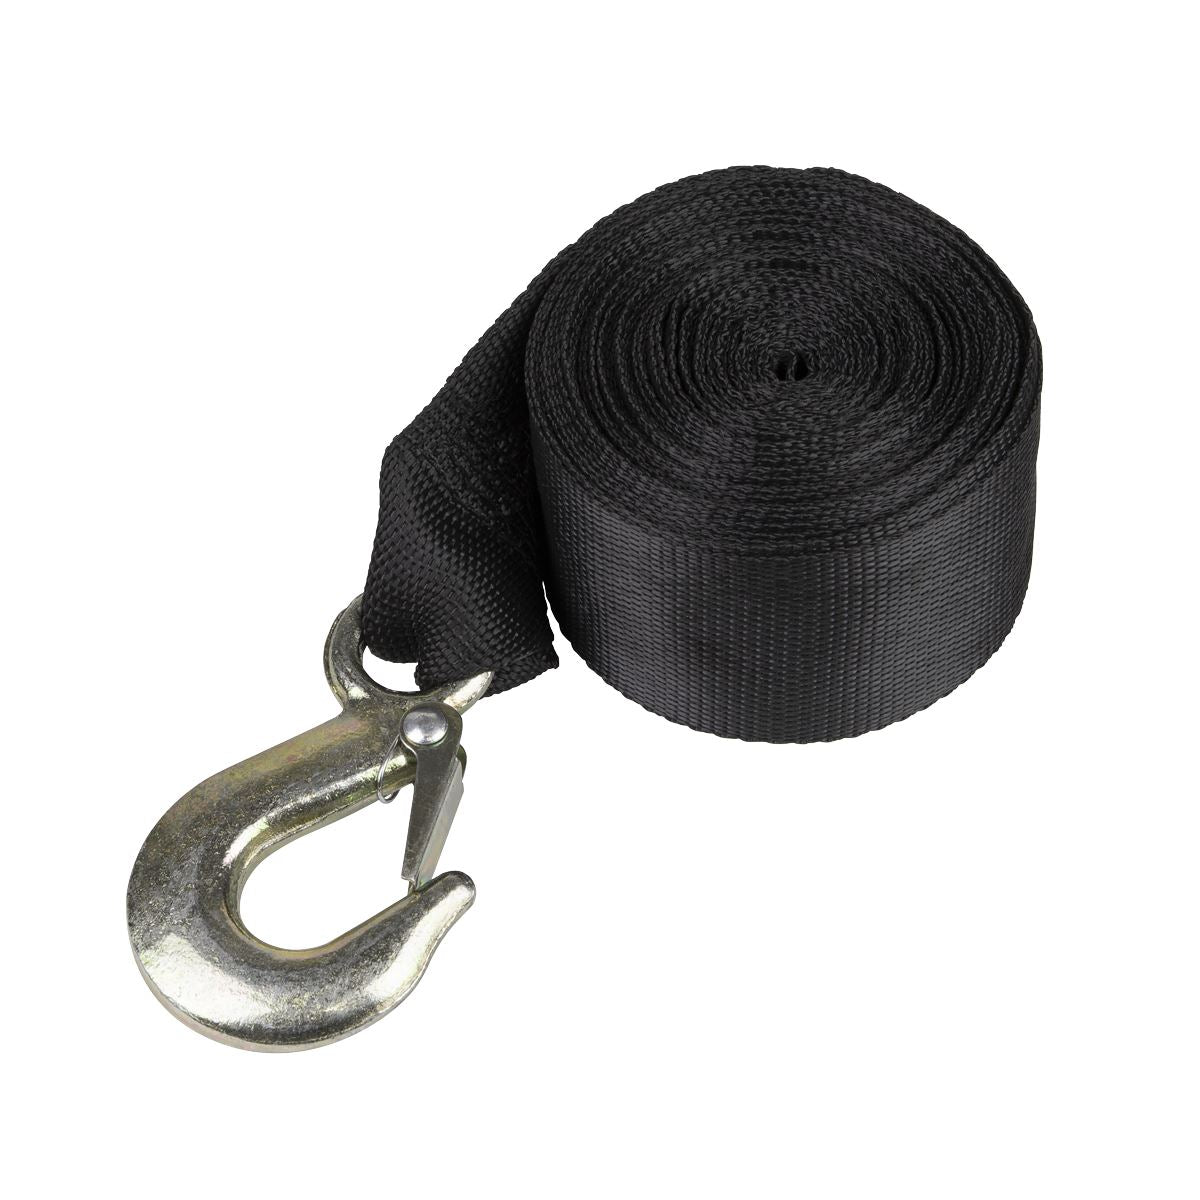 Sealey Trailer Winch Strap 50mm x 10m 1350kg Breaking Strength with Forged Hook